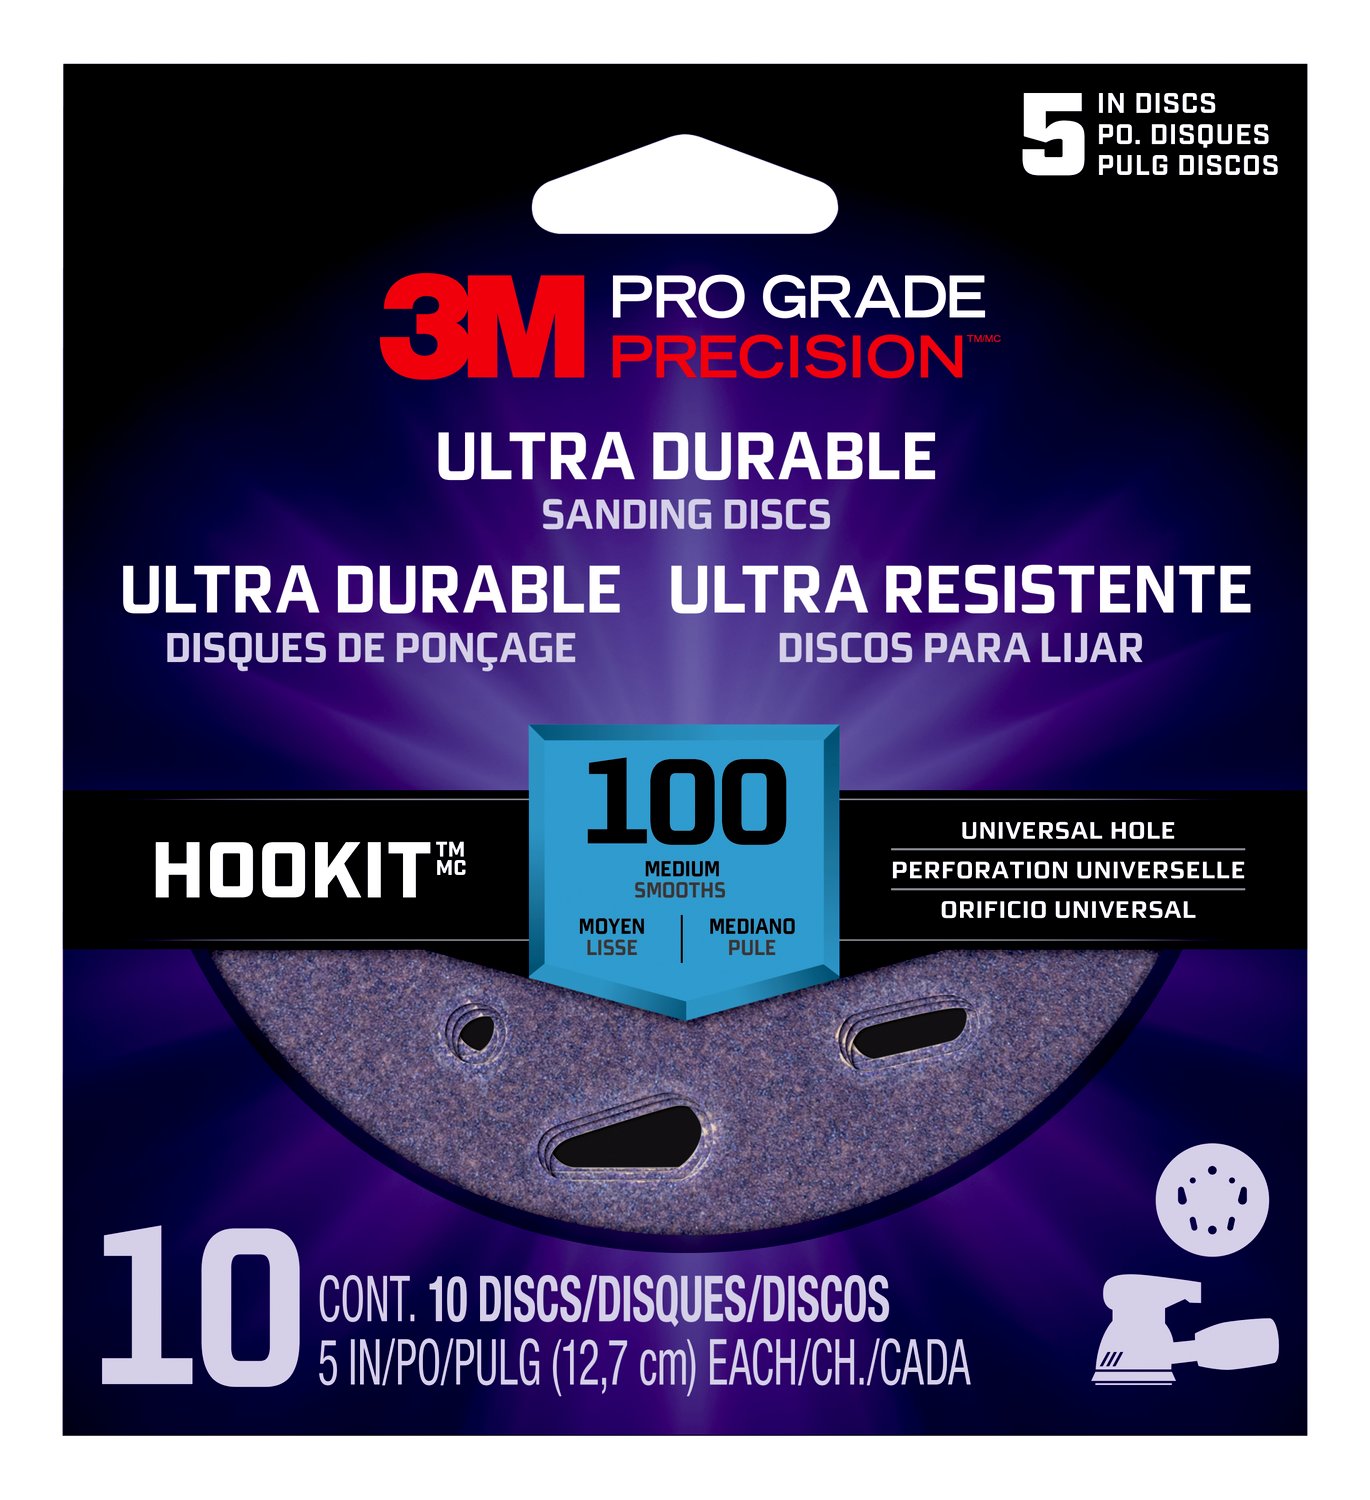 7100202881 - 3M Pro Grade Precision Ultra Durable Universal Hole Sanding Disc,
DUH5100TRI-10T, 5 IN x UH, 100, 10 pack